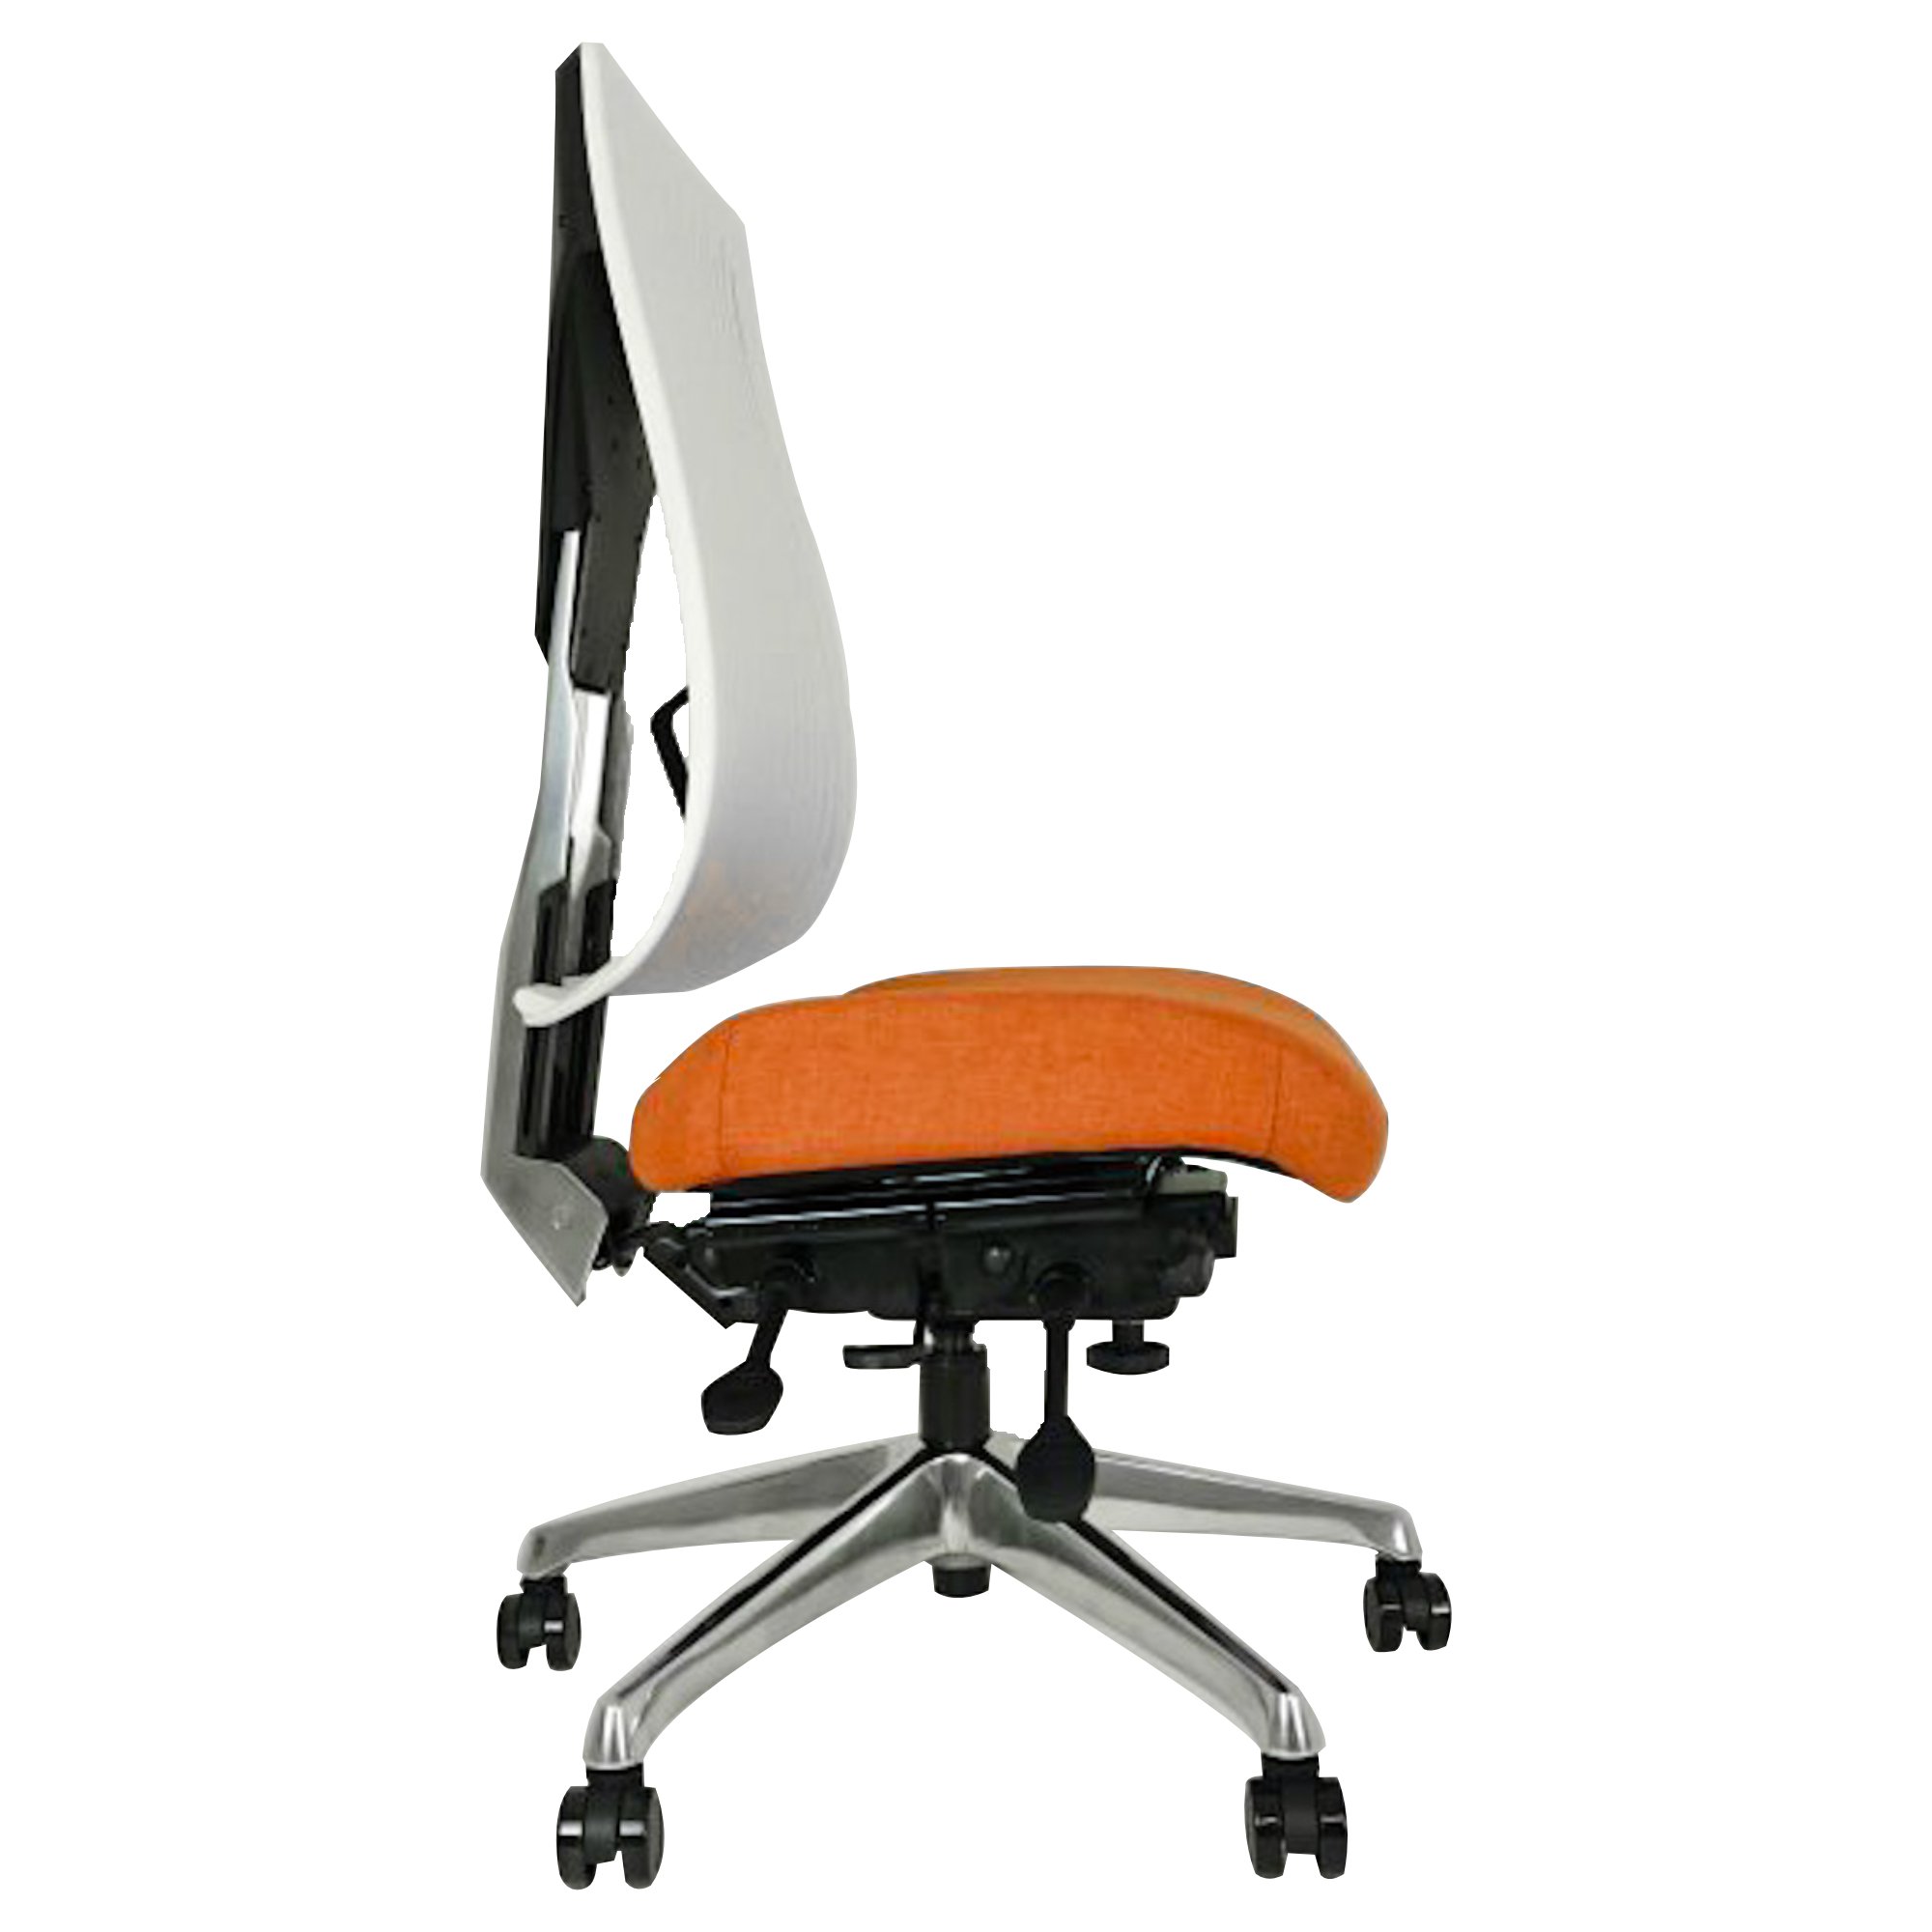  EDC-688 Fully Adjustable Ergonomic Gaming Chair by OM Seating